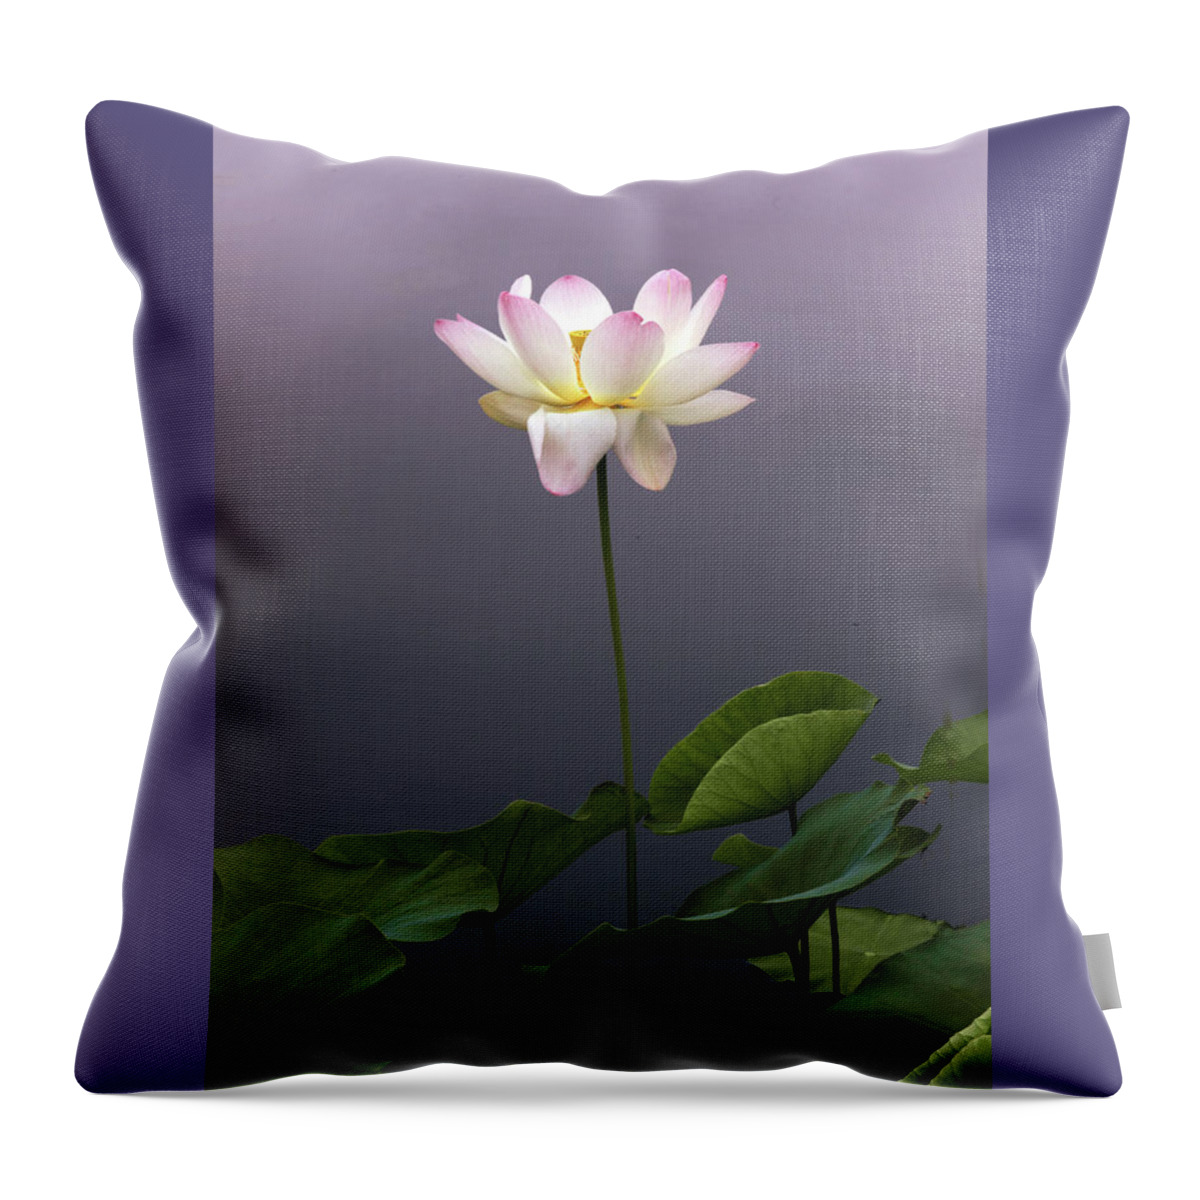 Lotus Throw Pillow featuring the photograph Lotus Ascending by Jessica Jenney